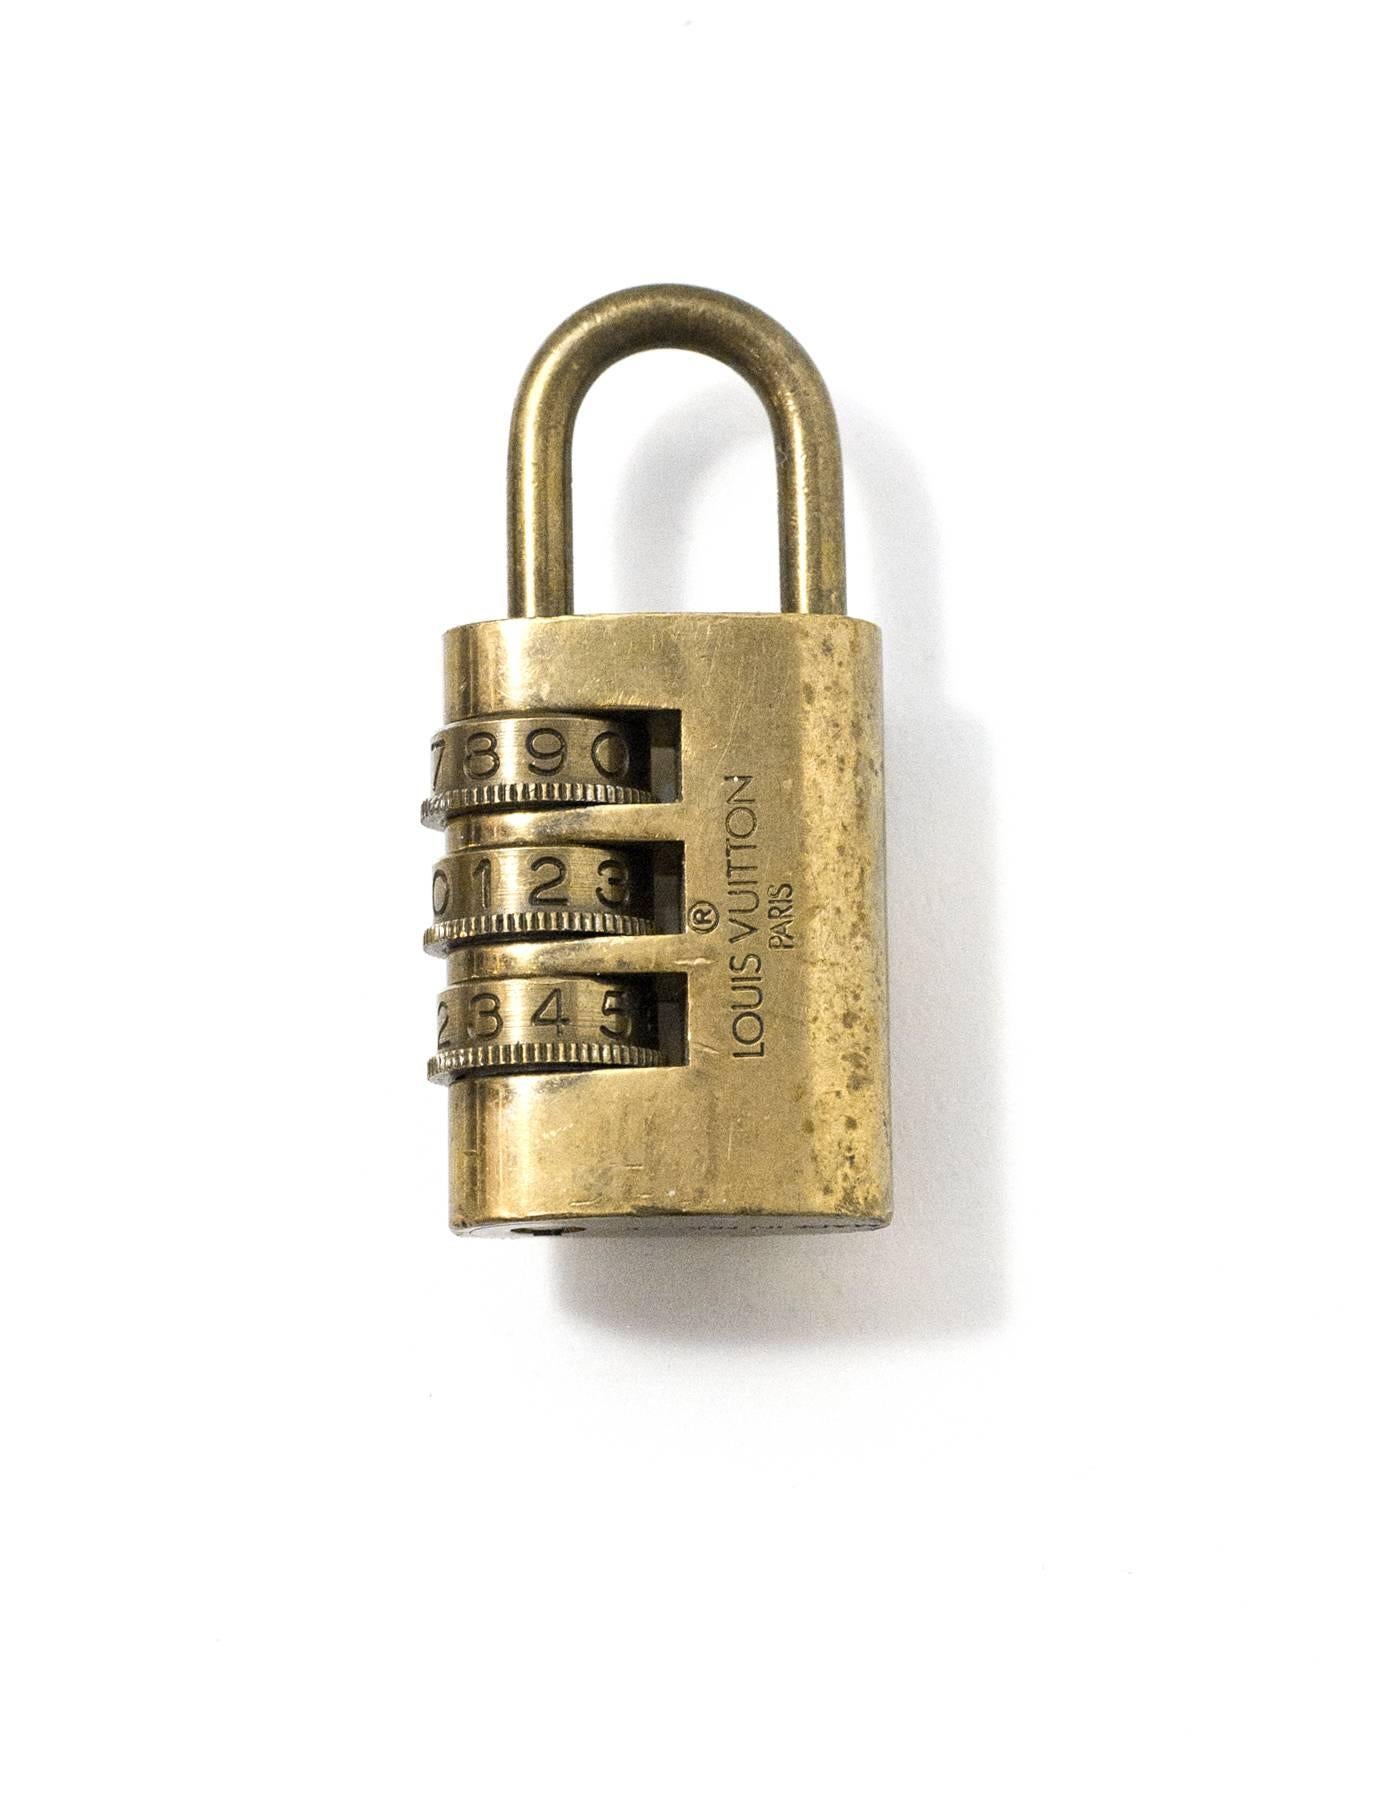 Louis Vuitton Vintage Brass Combination Lock

Made In: France
Color: Gold
Hardware: Brass
Materials: Metal
Stamp: Louis Vuiton Paris Made in France
Overall Condition: Very good good pre-owned condition, light tarnish throughout

Measurements: 
Lock: